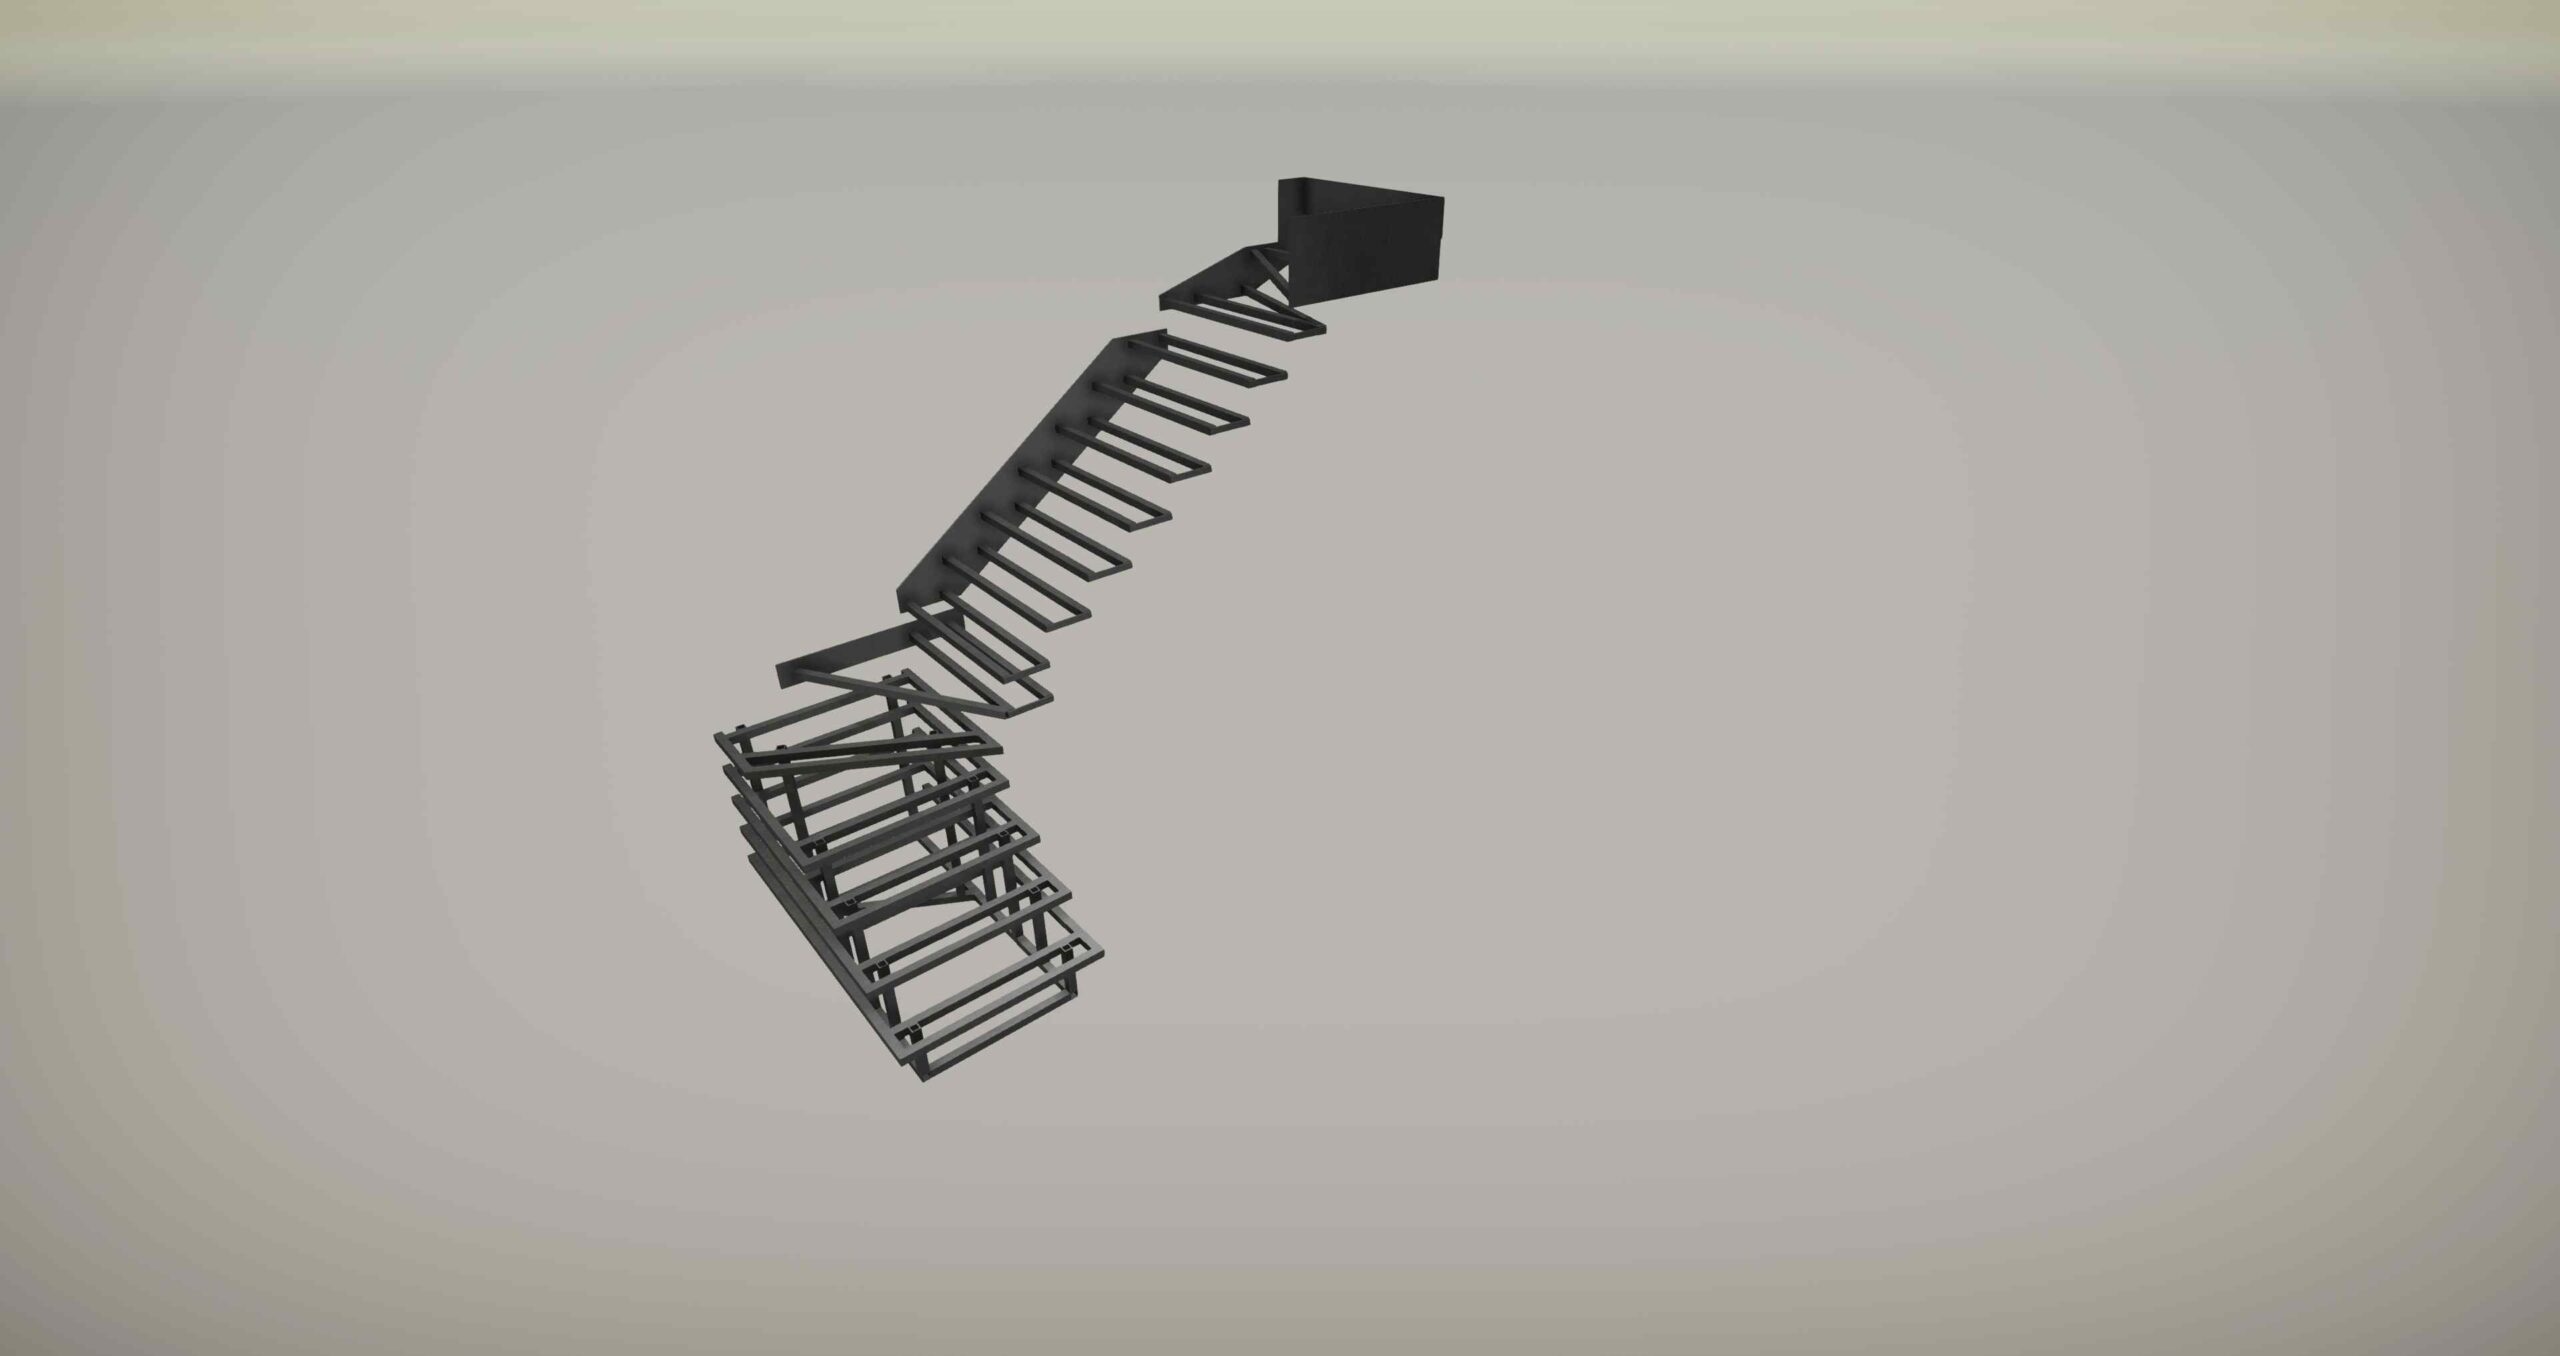 Technical drawing of staircase